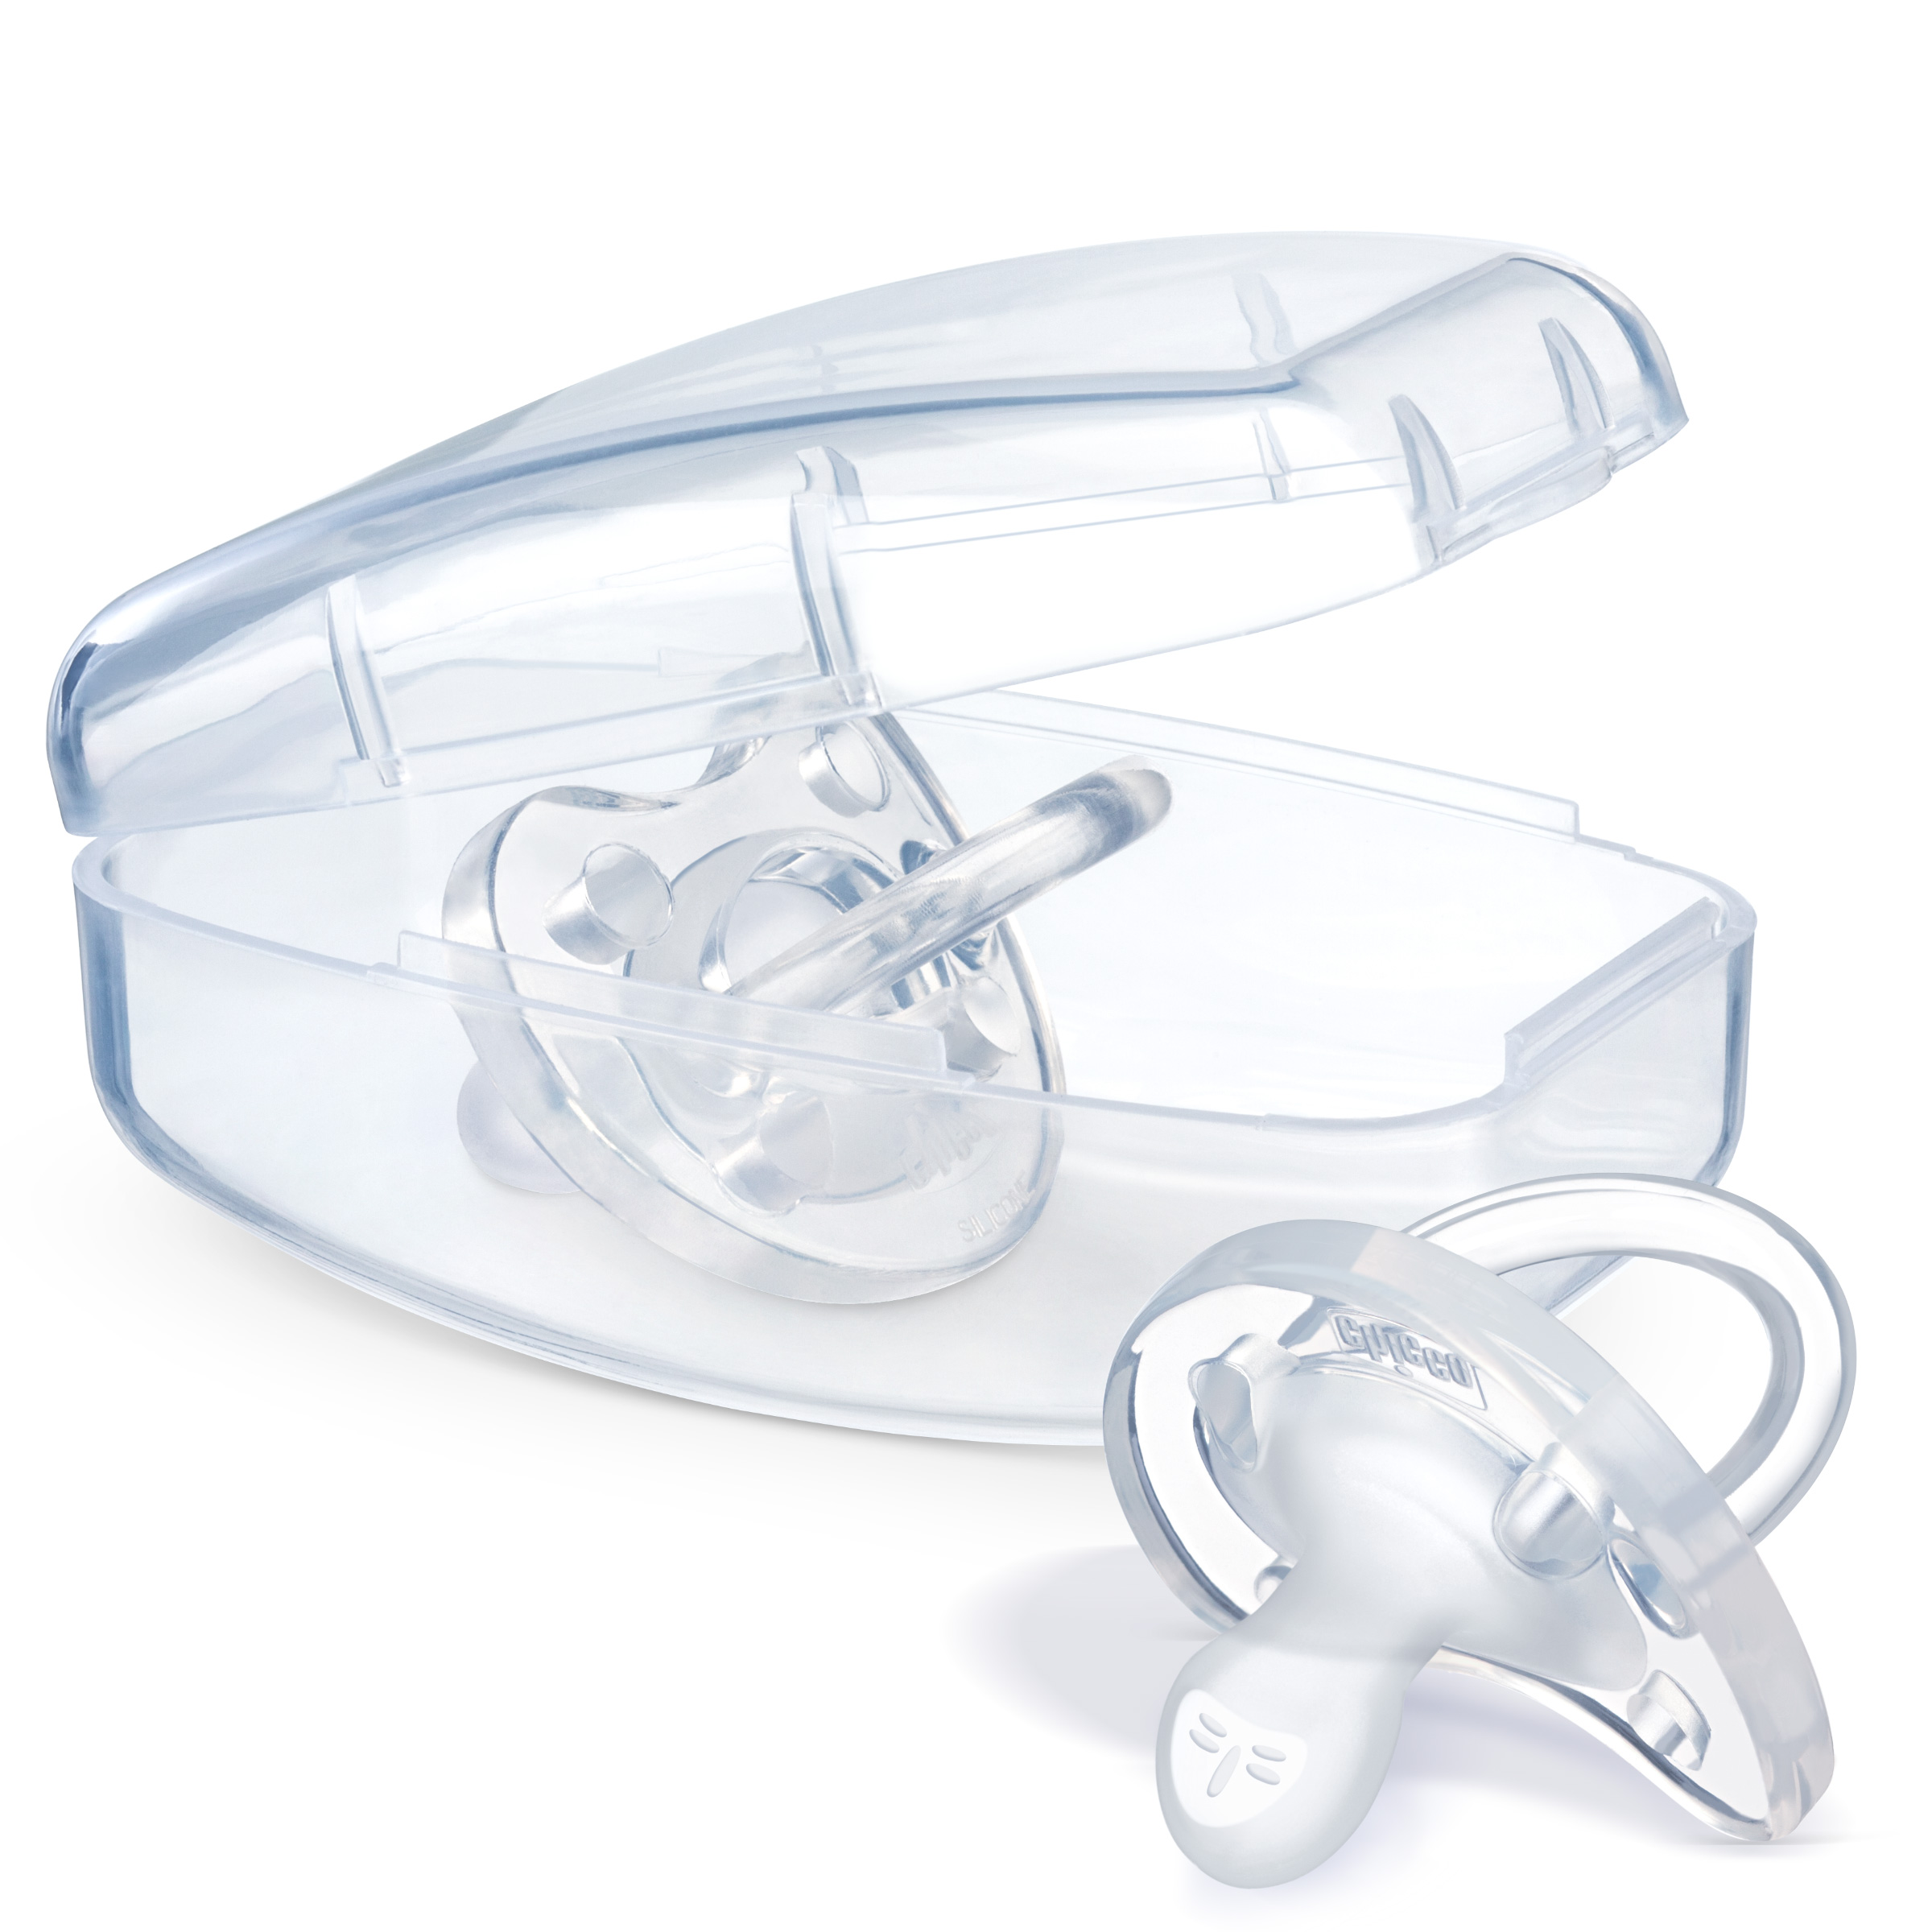 Chicco Offers EasyToSterilize Pacifier That Helps With